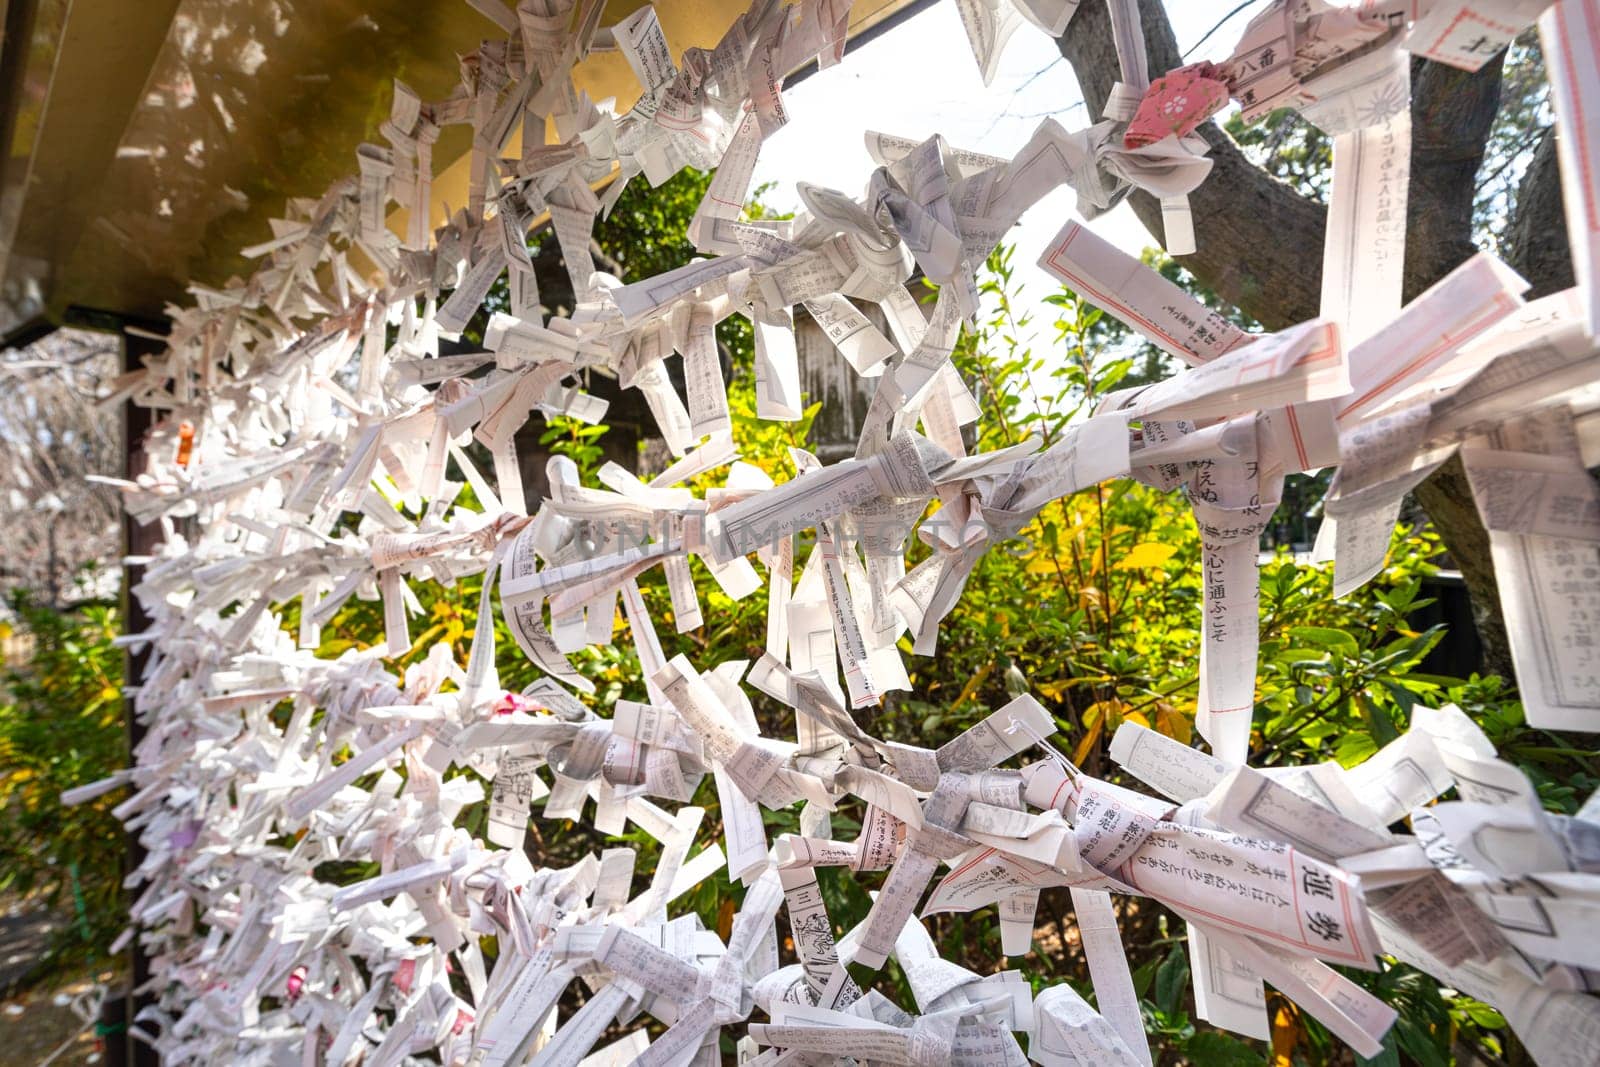 the Omikuji sheets that predict one's future outside a temple in Tokyo, Japan by sergiodv